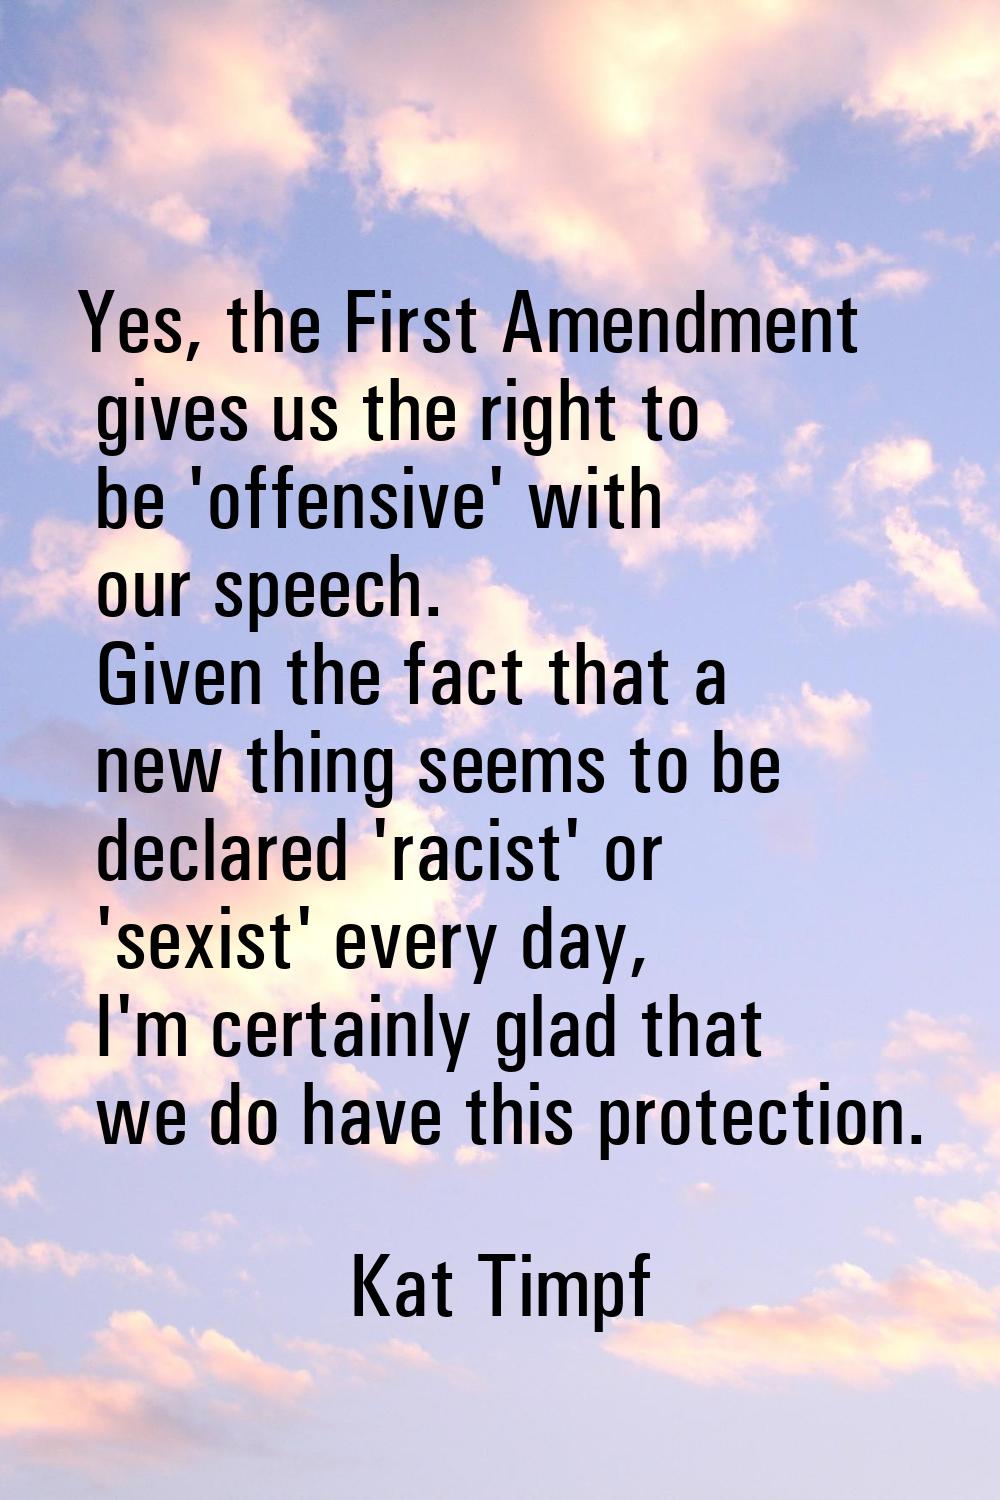 Yes, the First Amendment gives us the right to be 'offensive' with our speech. Given the fact that 